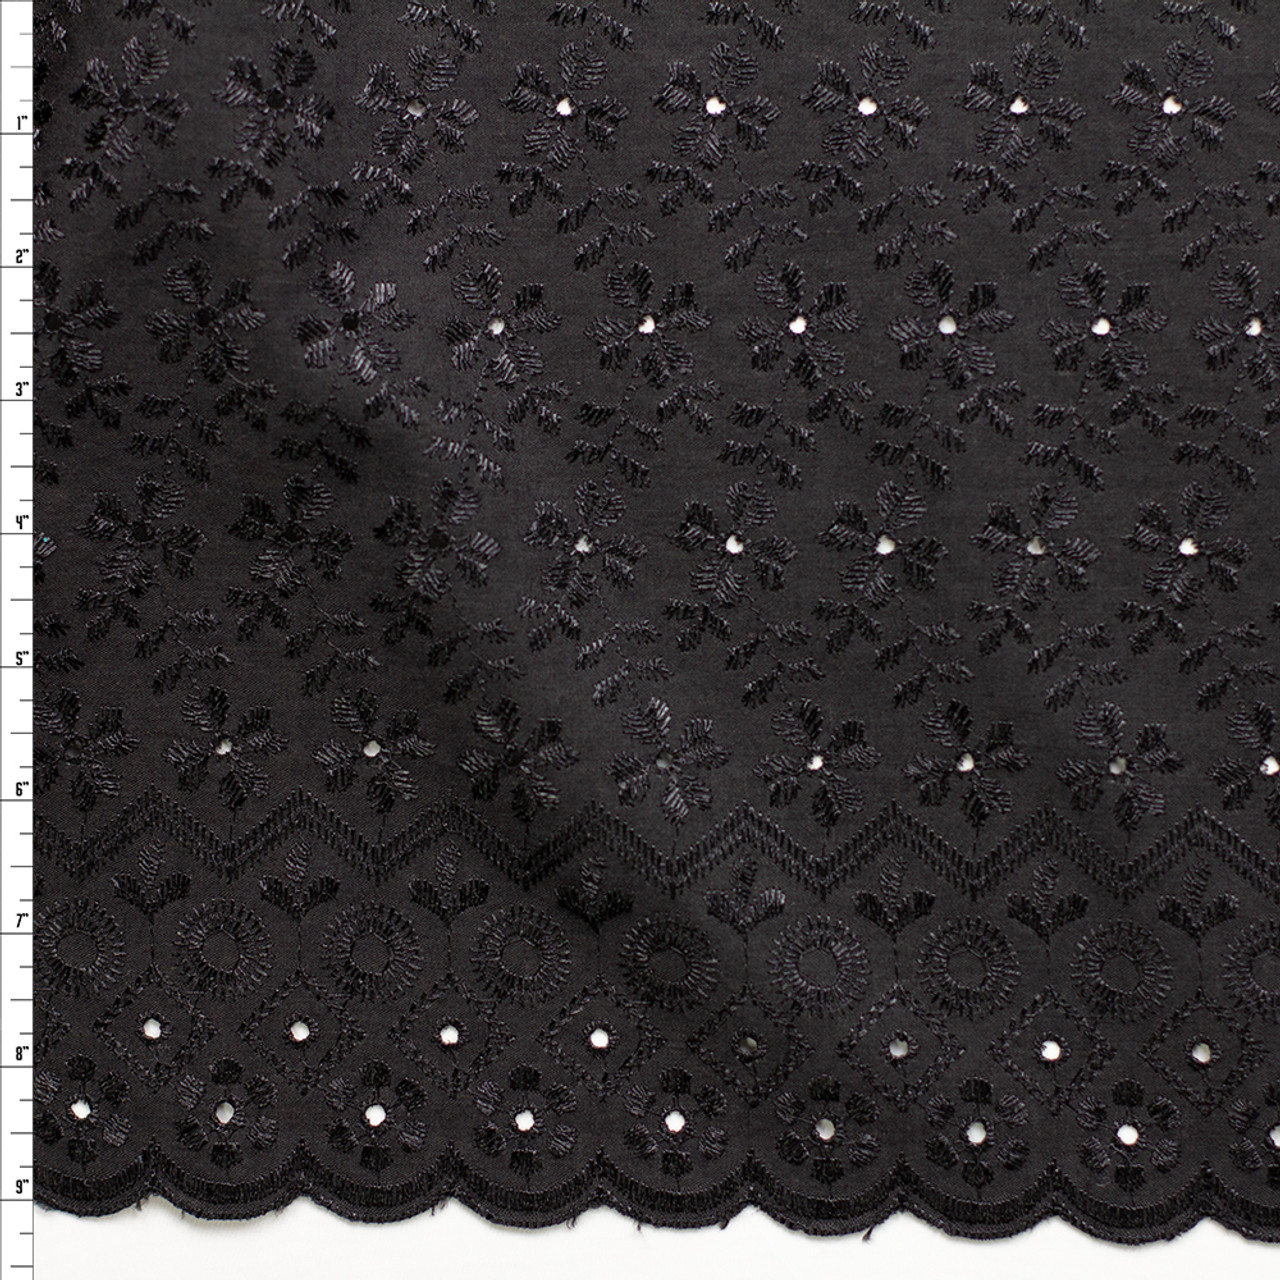 Cali Fabrics Black Floral With Scalloped Double Border Cotton Eyelet Fabric  by the Yard